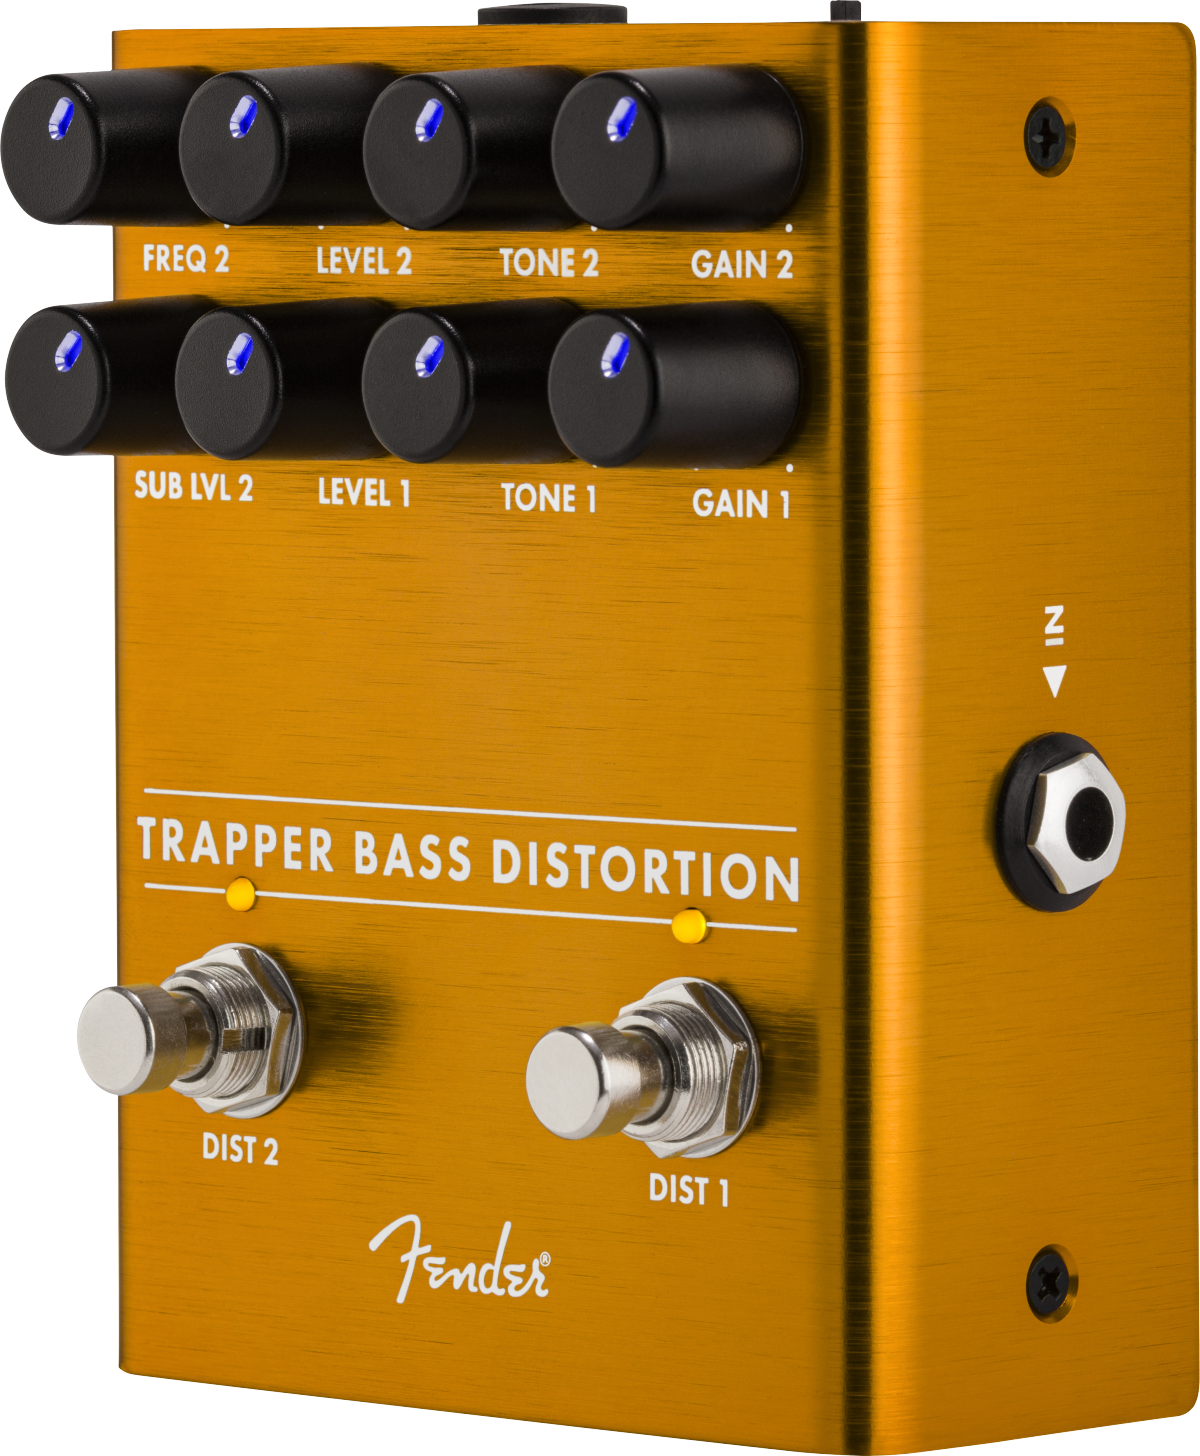 Fender Trapper Bass Distortion - Overdrive, distortion, fuzz effect pedal for bass - Variation 3